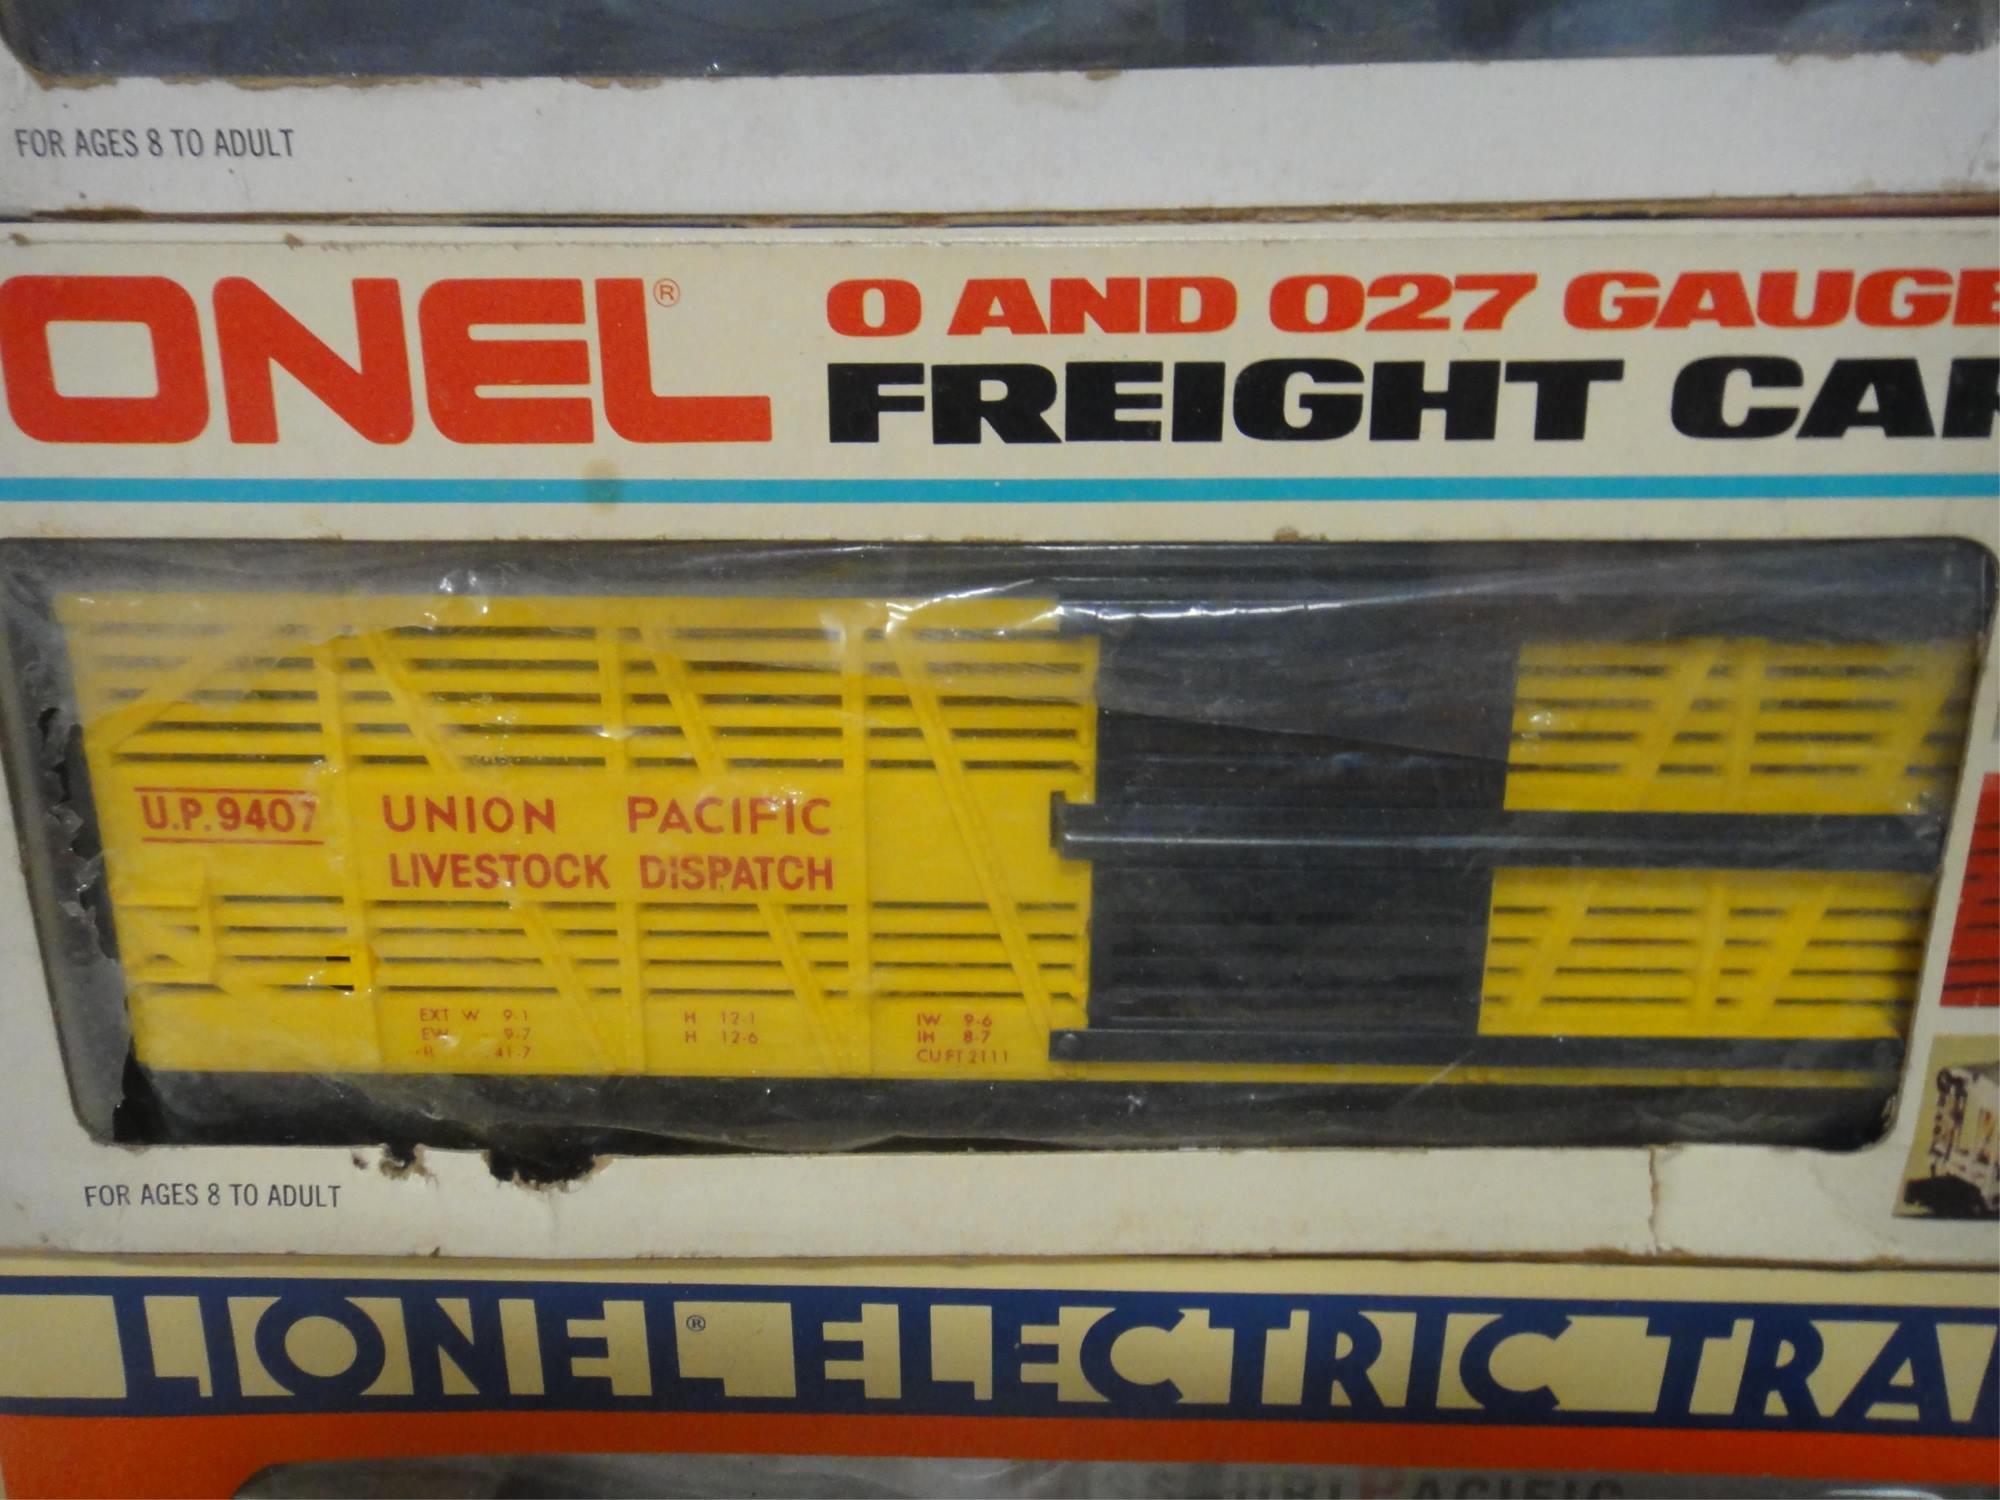 3 LIONEL ROLLING STOCK